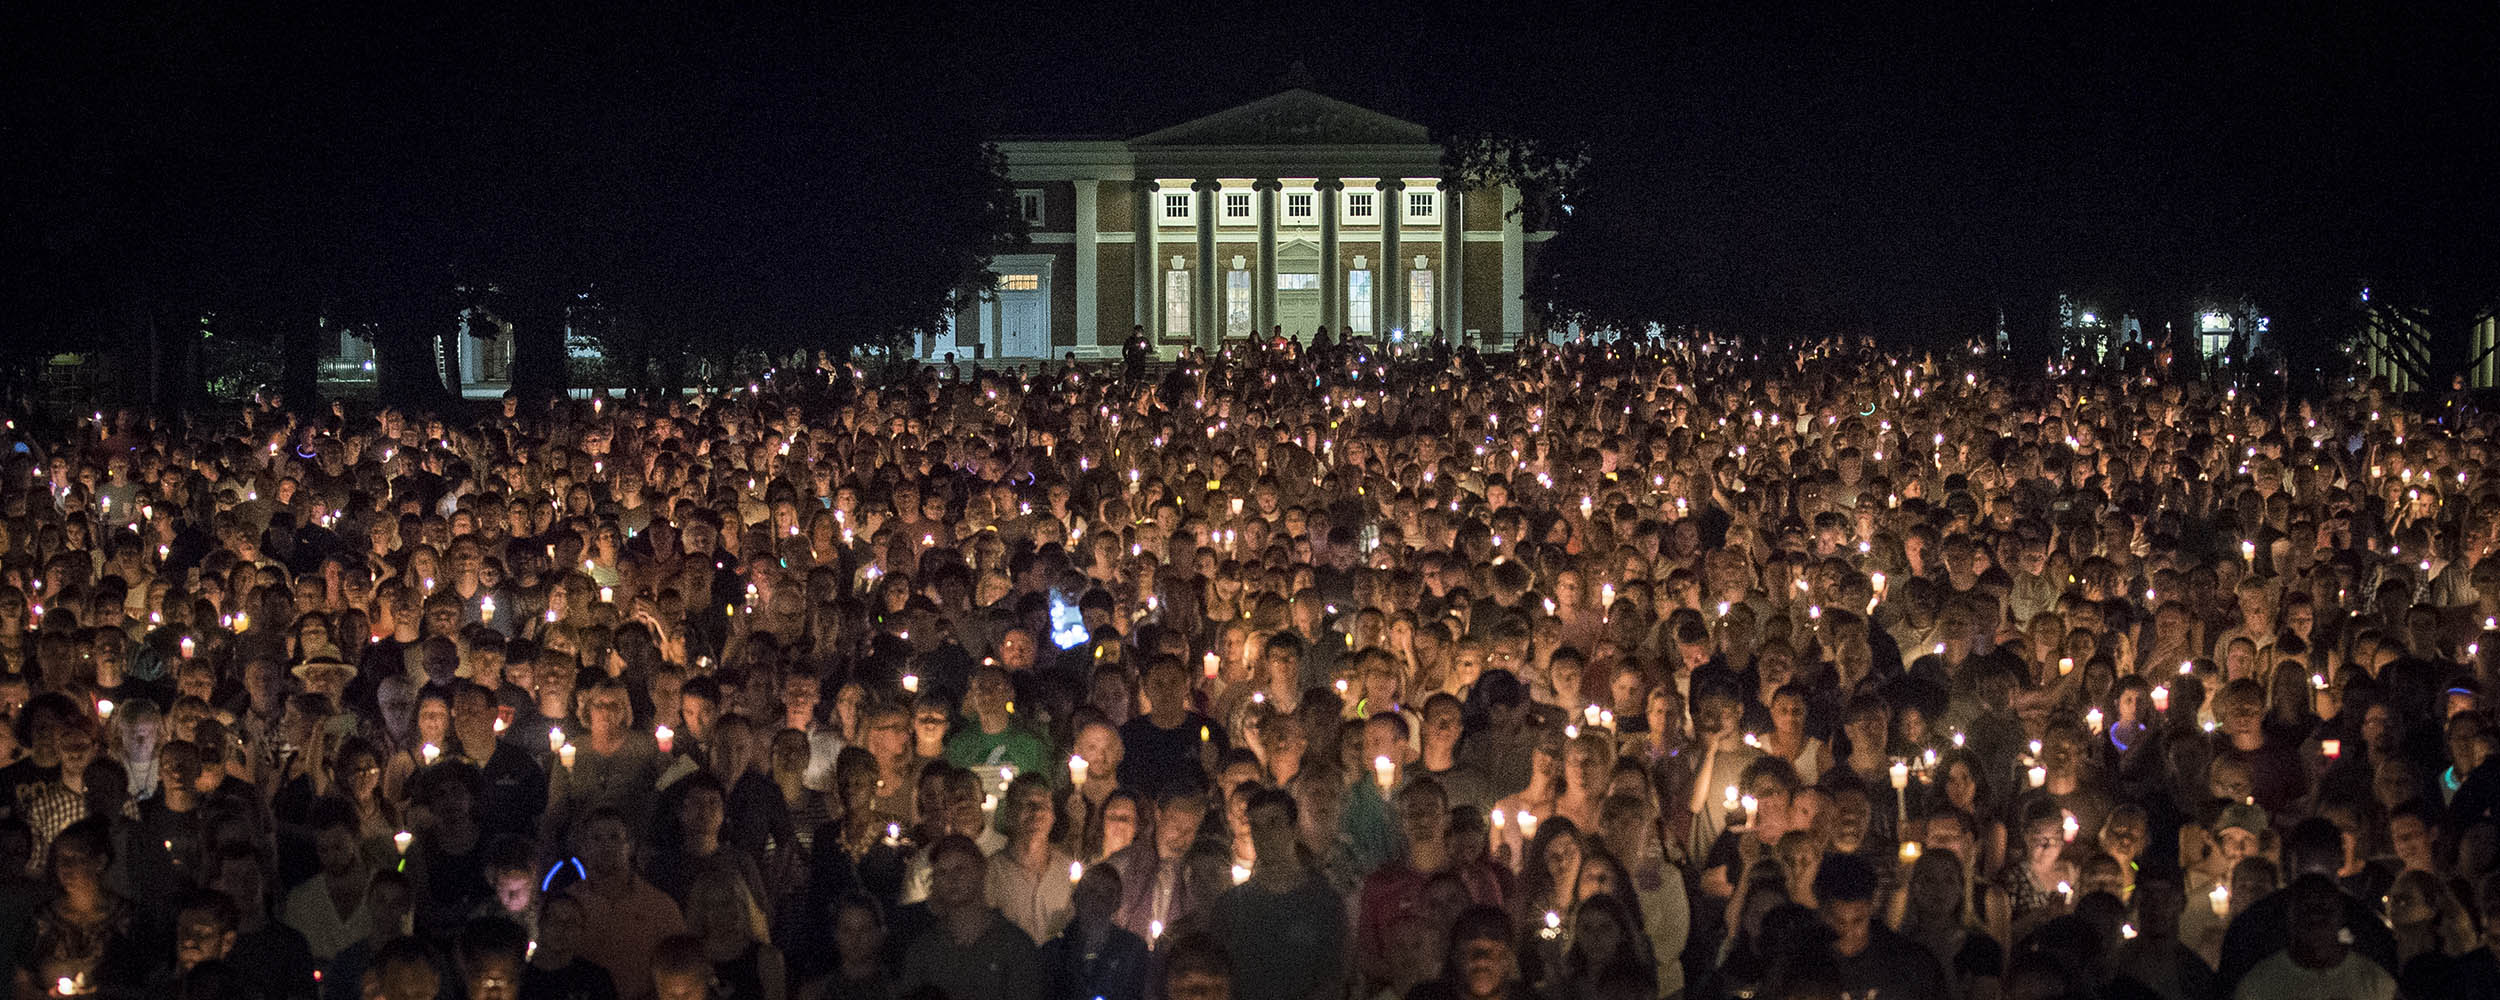 Thousands gather on the Lawn holding candles